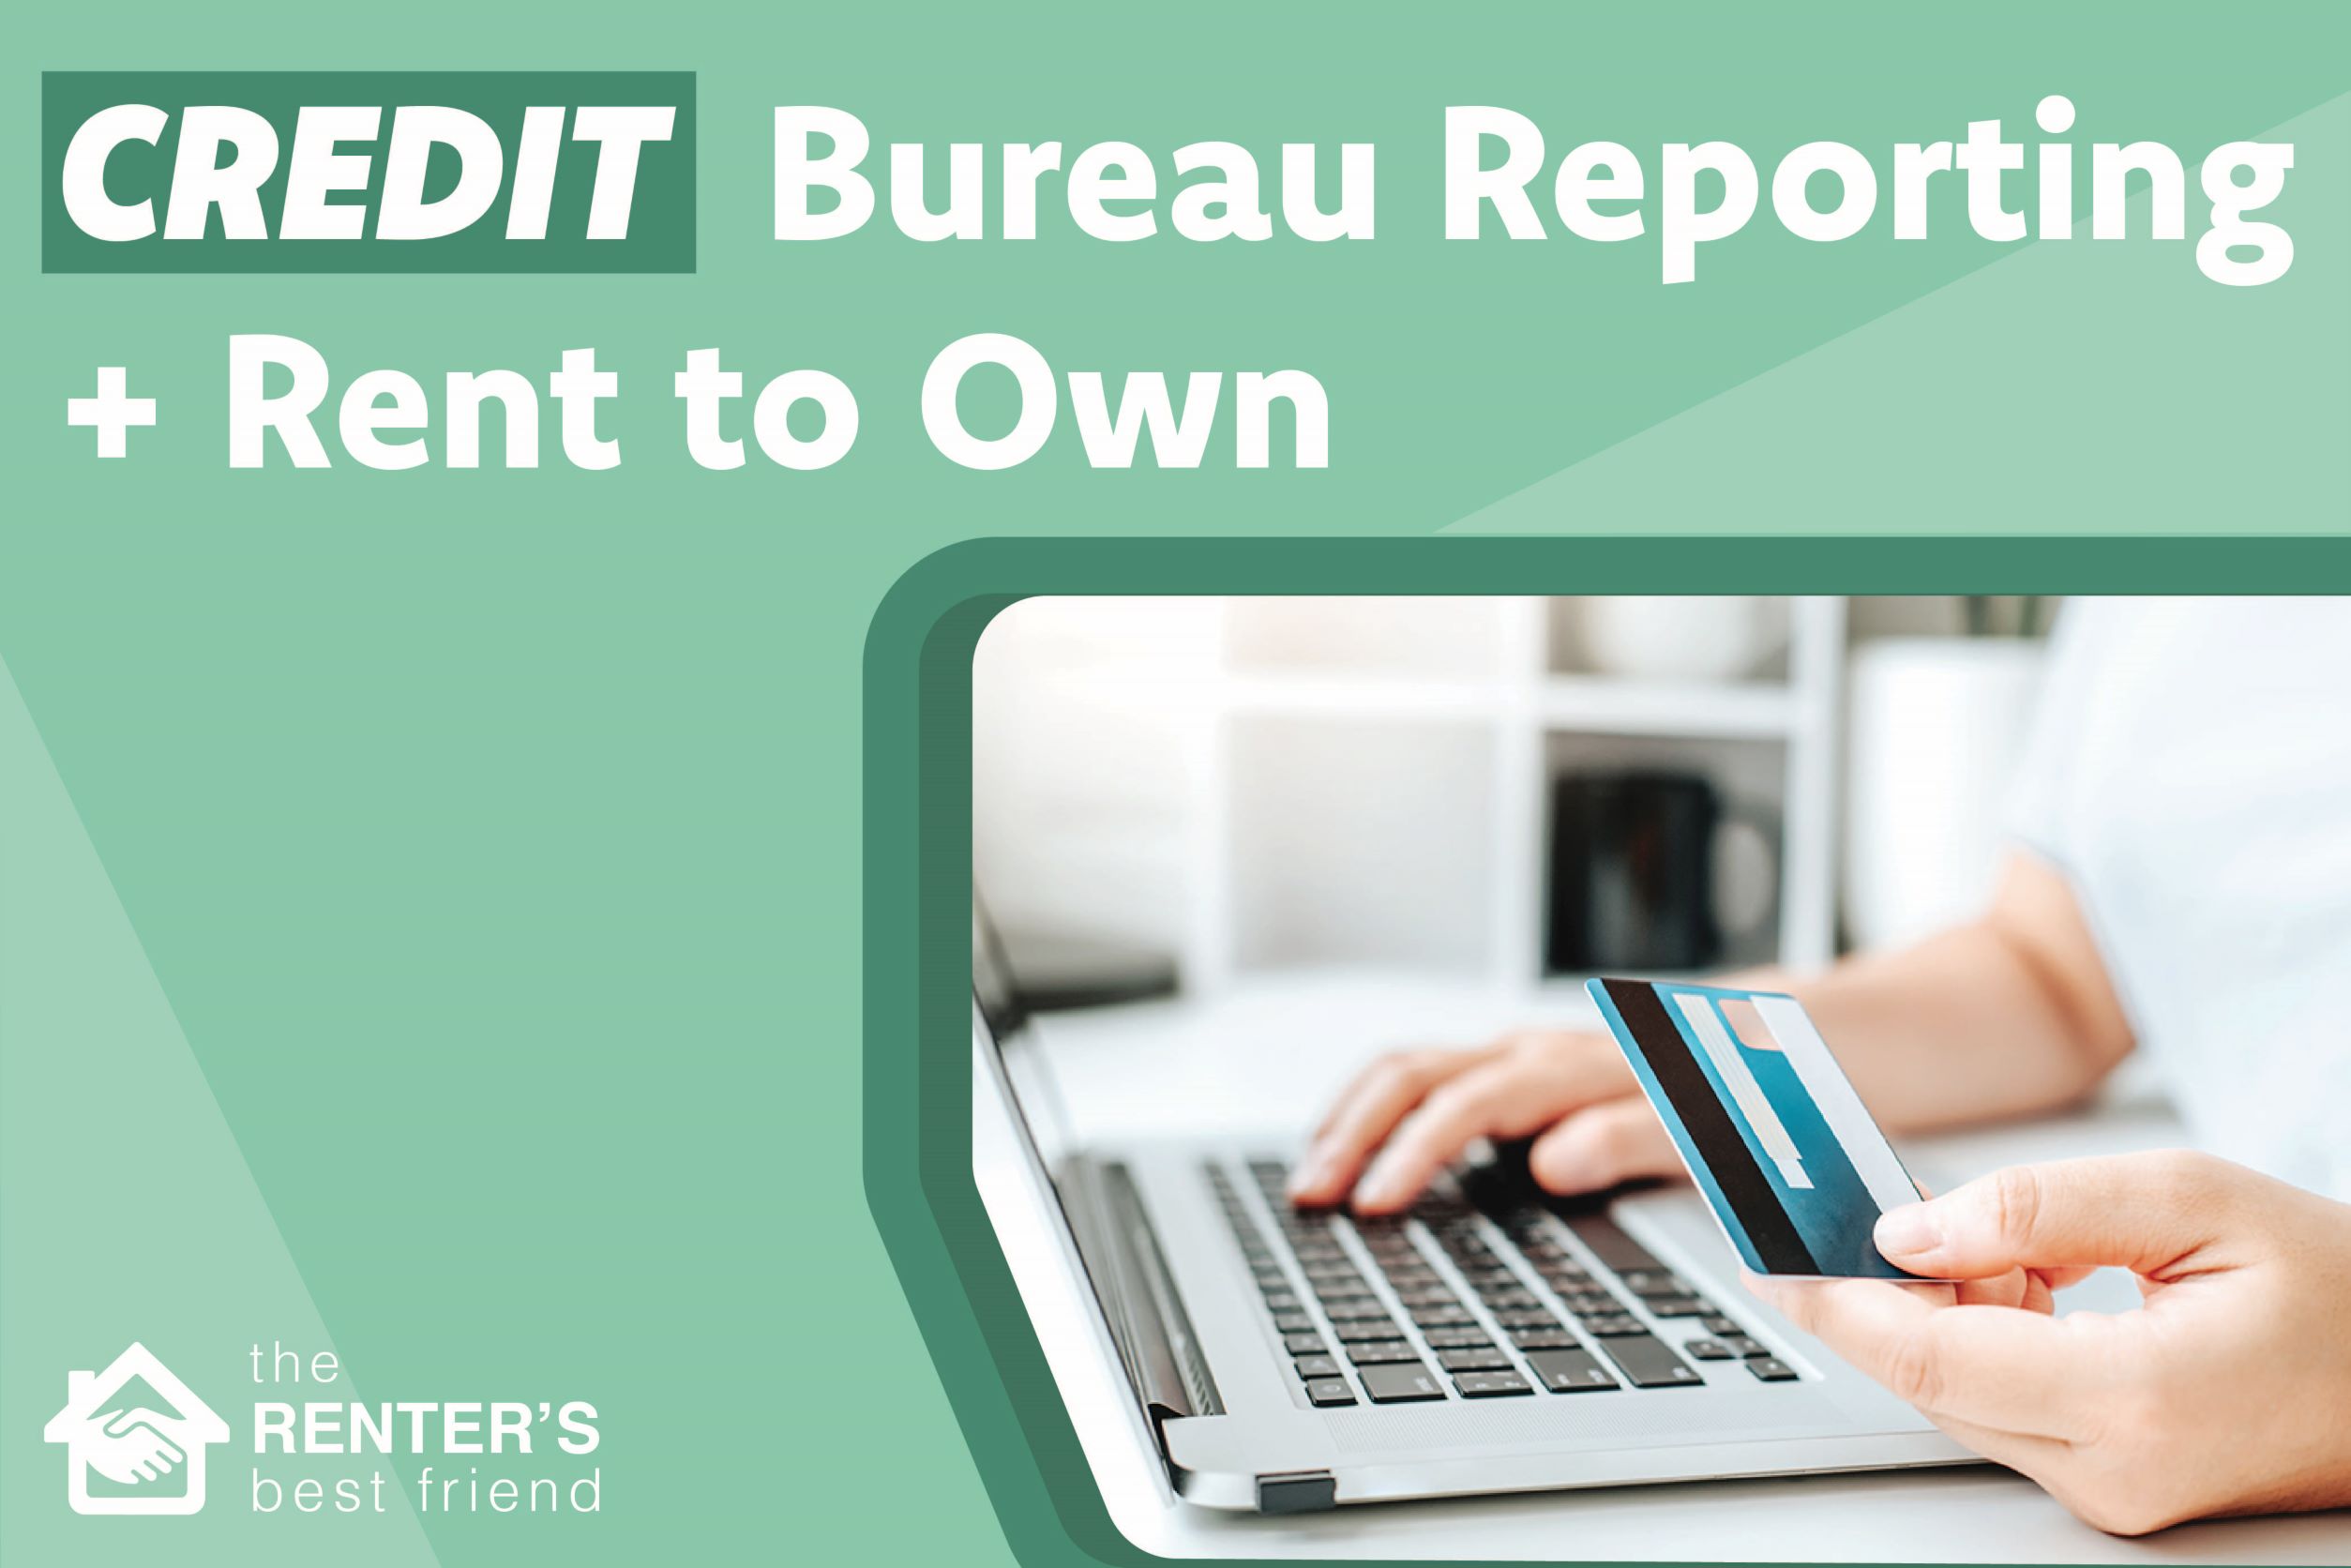 Do My Monthly Rent to Own Payments Report to the Credit Bureau?